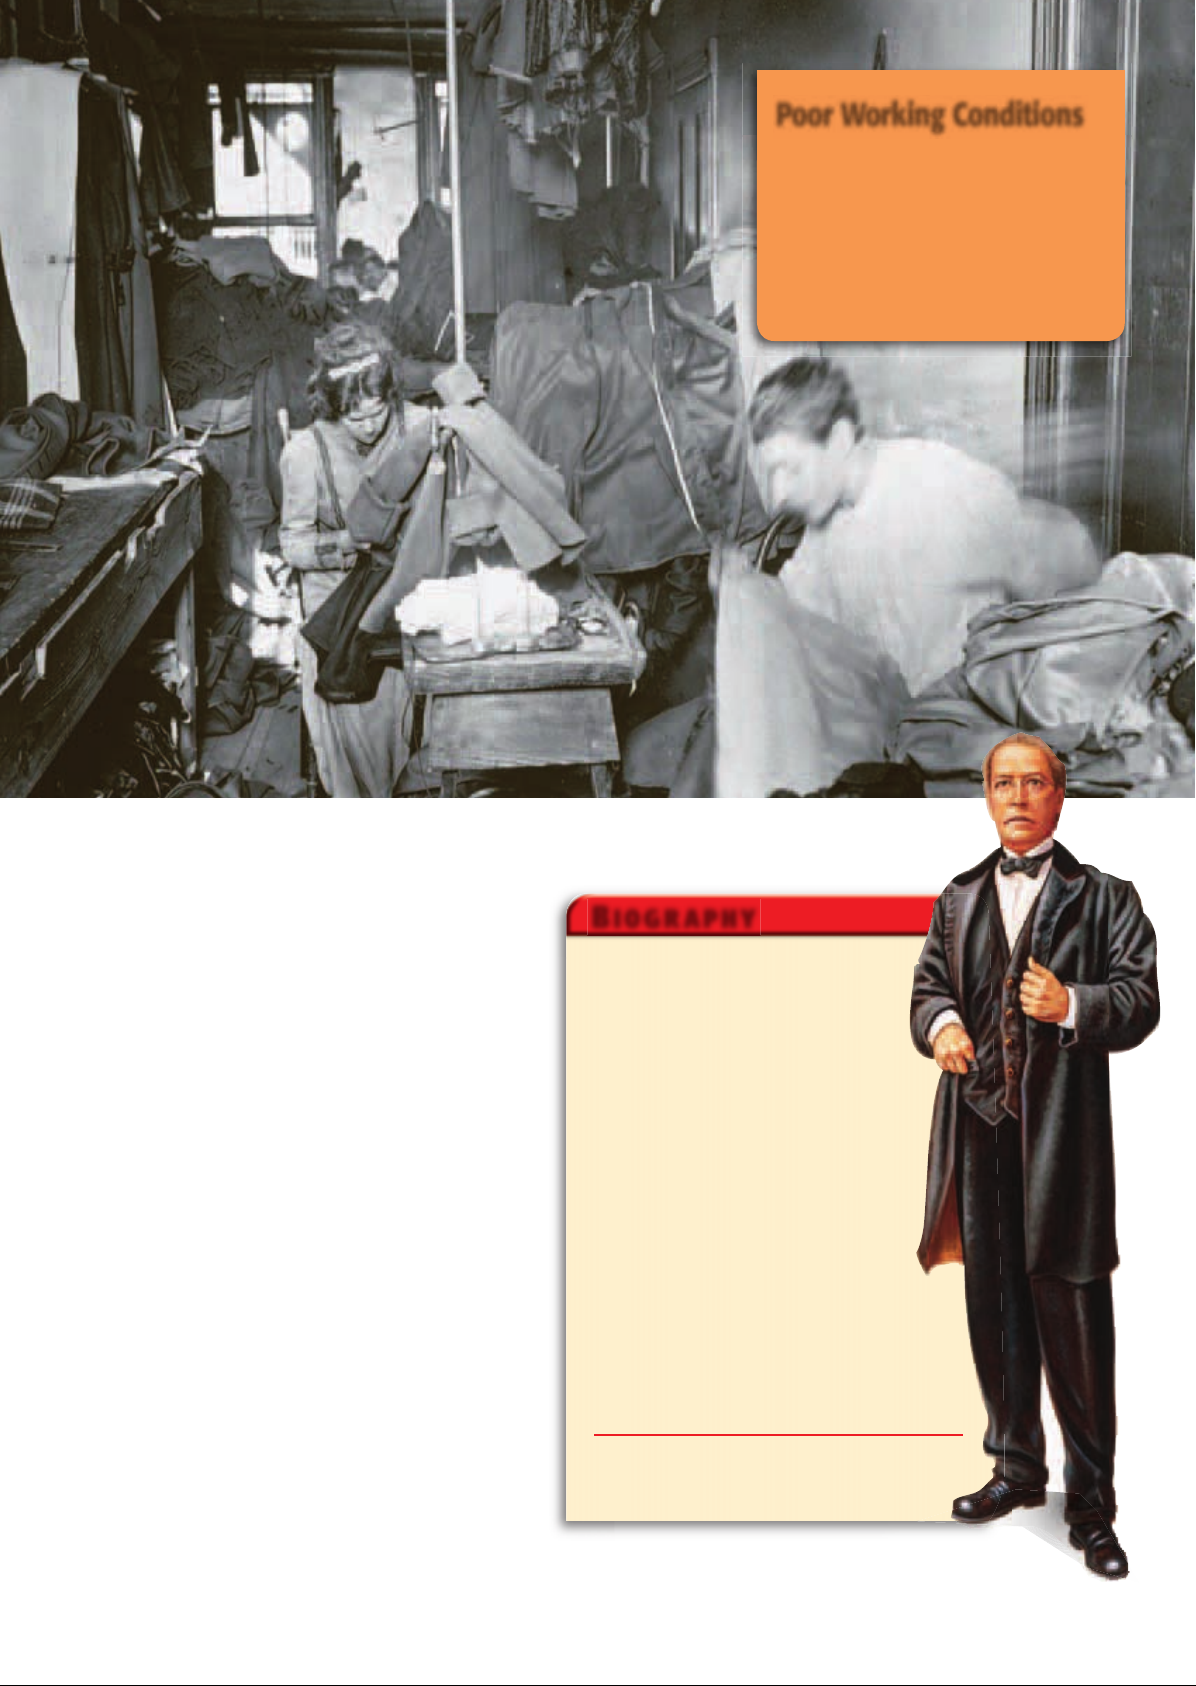 US_History_Textbook_8th_Grade_Chapter_18_An_Industrial_Nation_Du0X8KP Image-13